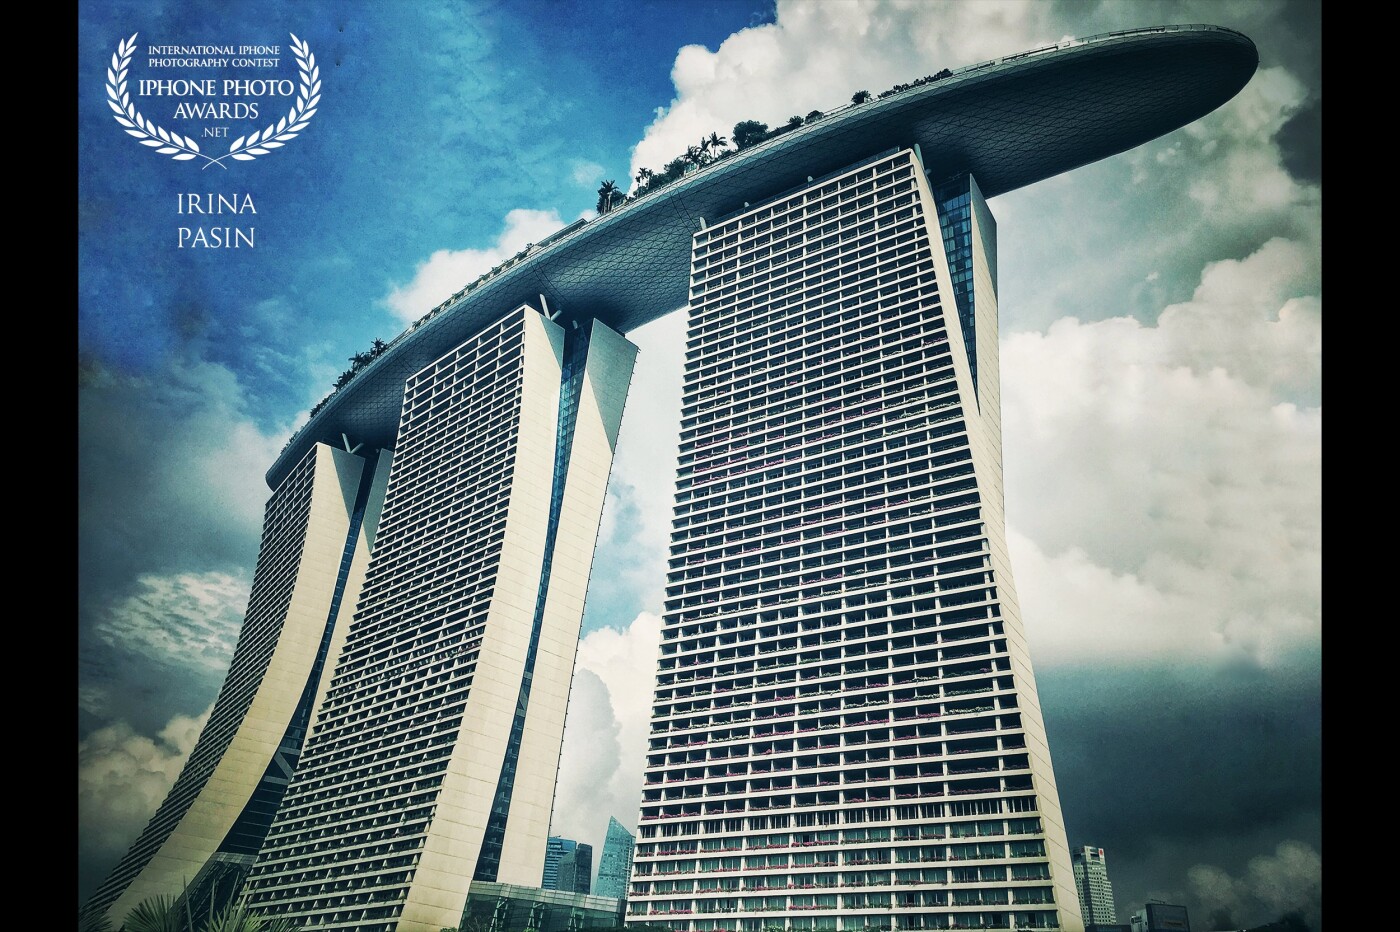 Singapore's one of the most famous buildings - Marina Bay hotel. Spectacular even more so up close. Like a ship sailing through the sky.